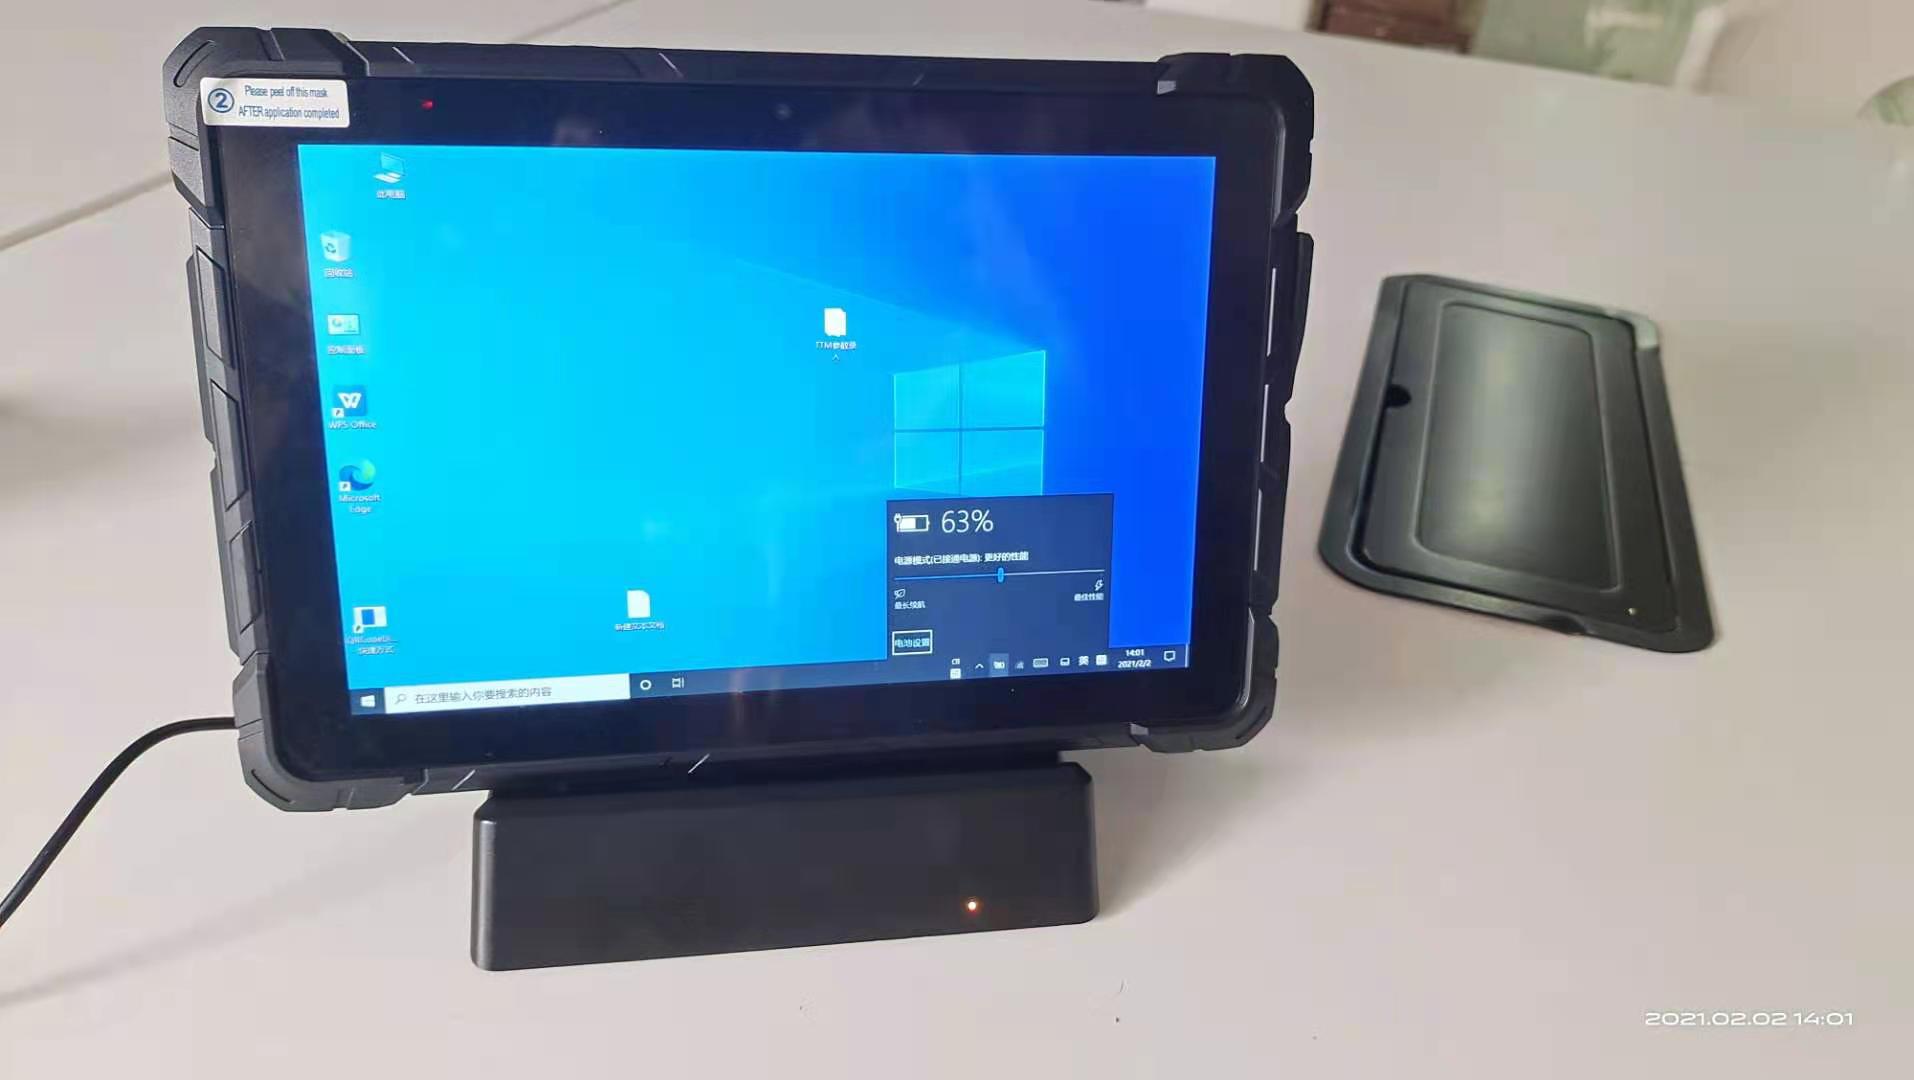  industrial Tablet PC